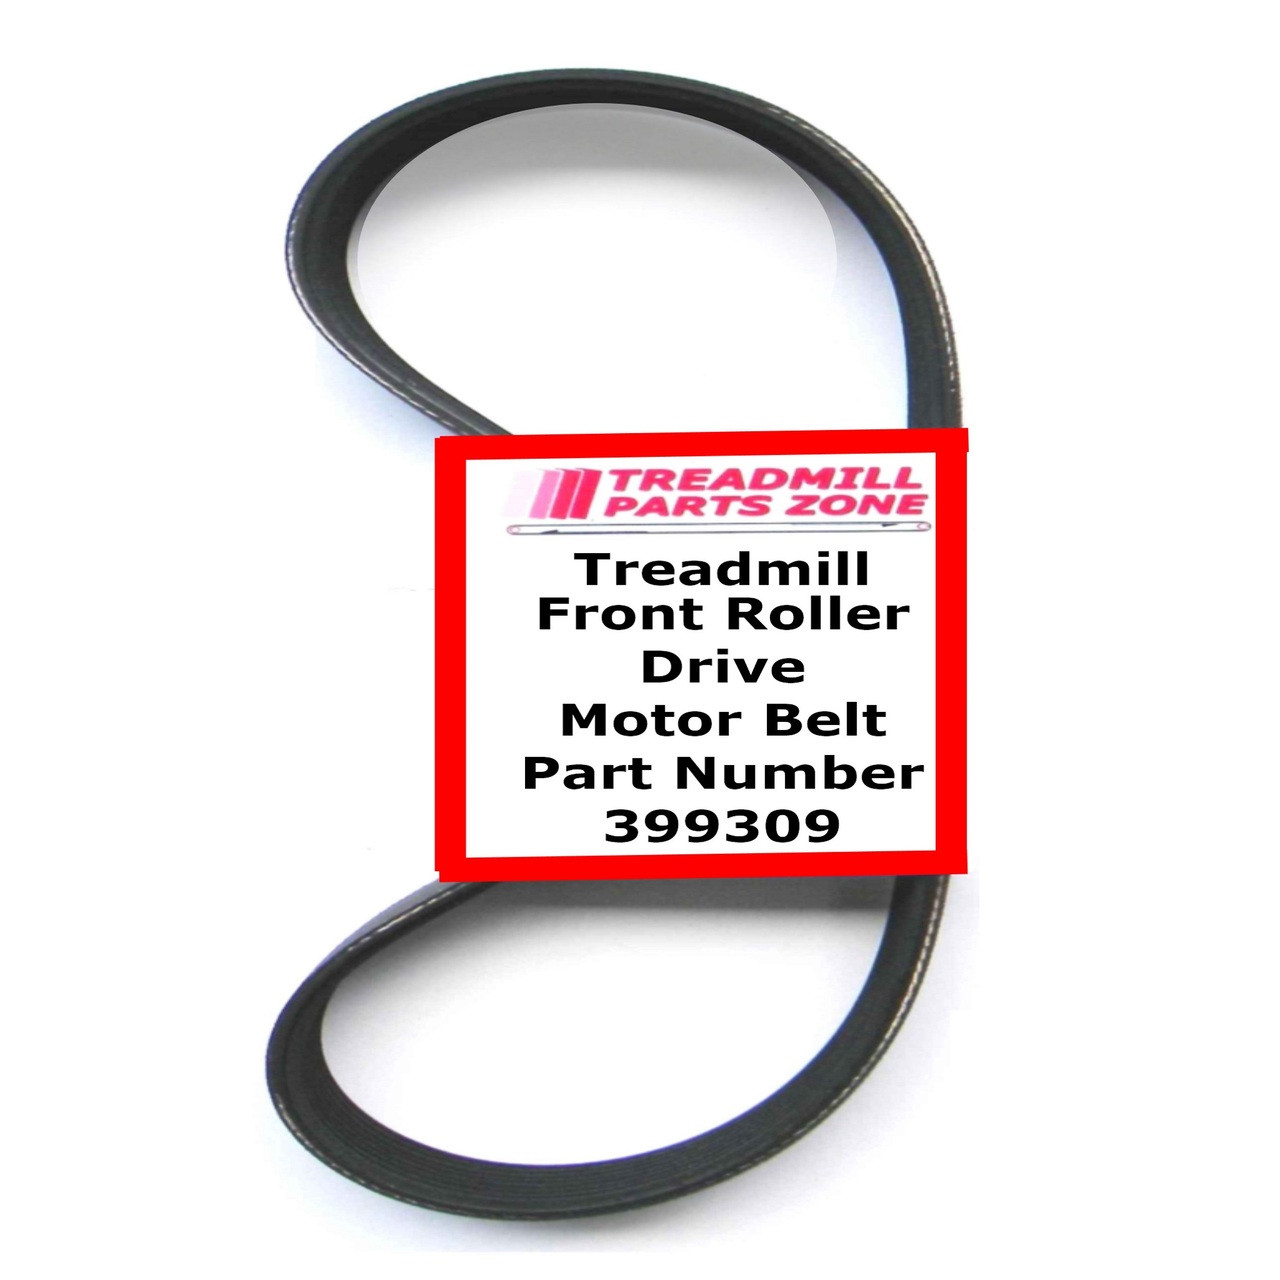 Sears Treadmill Model 25023.13 Drive Pulley Belt Part Number 399309